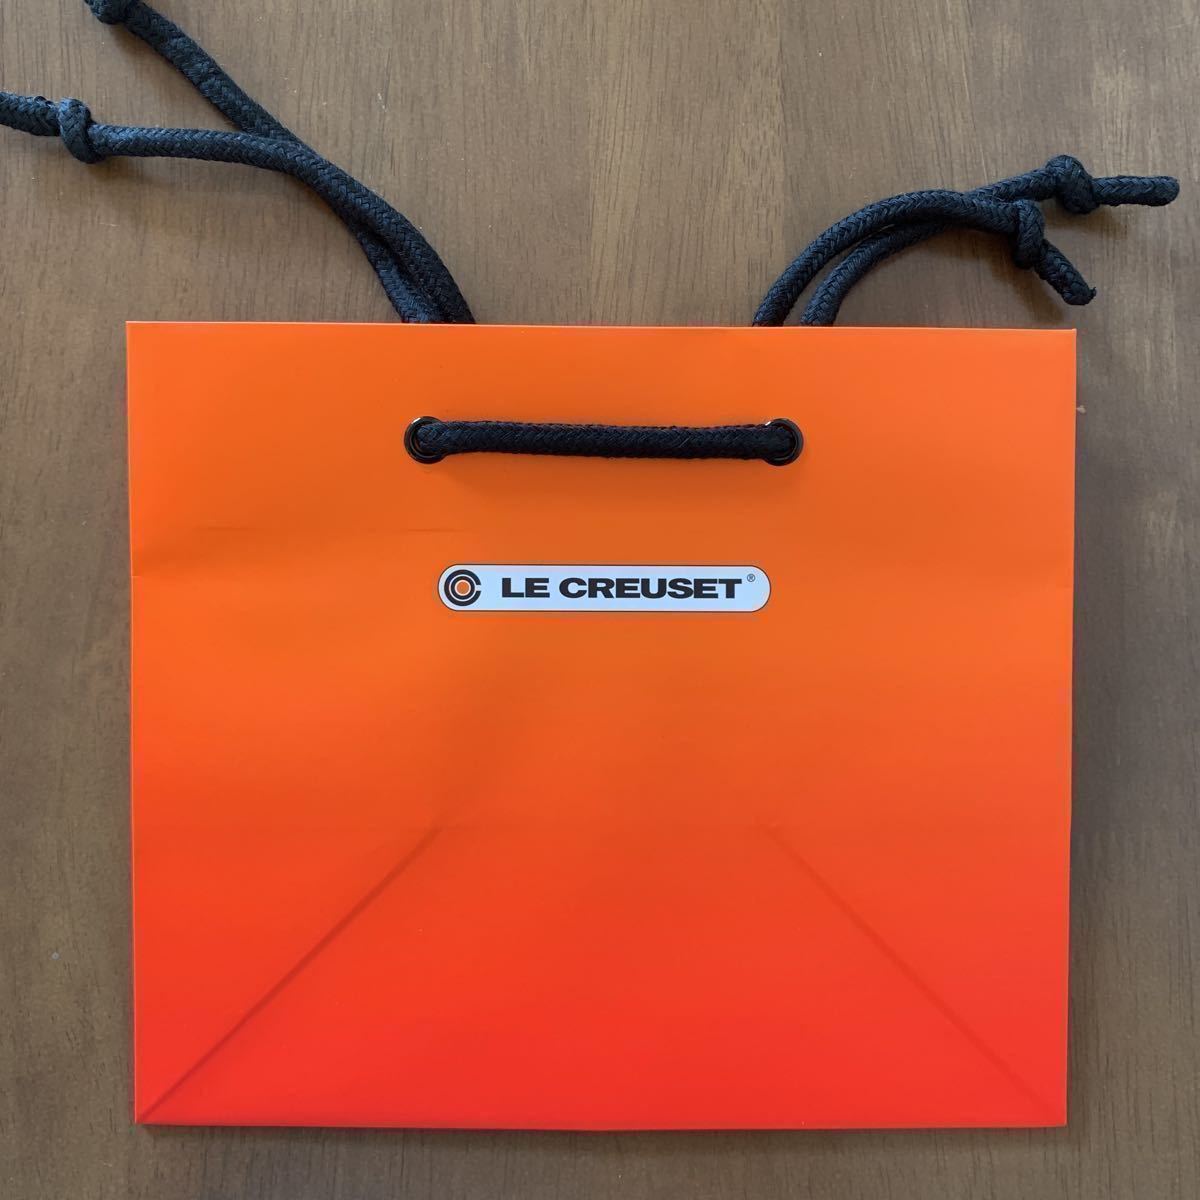 LE CREUSET ルクルーゼ 紙袋 3枚セット 新品 未使用 ランチバッグ エコバッグ 小分け お裾分け ギフト ショッパー プレゼント キッチン 袋_画像2